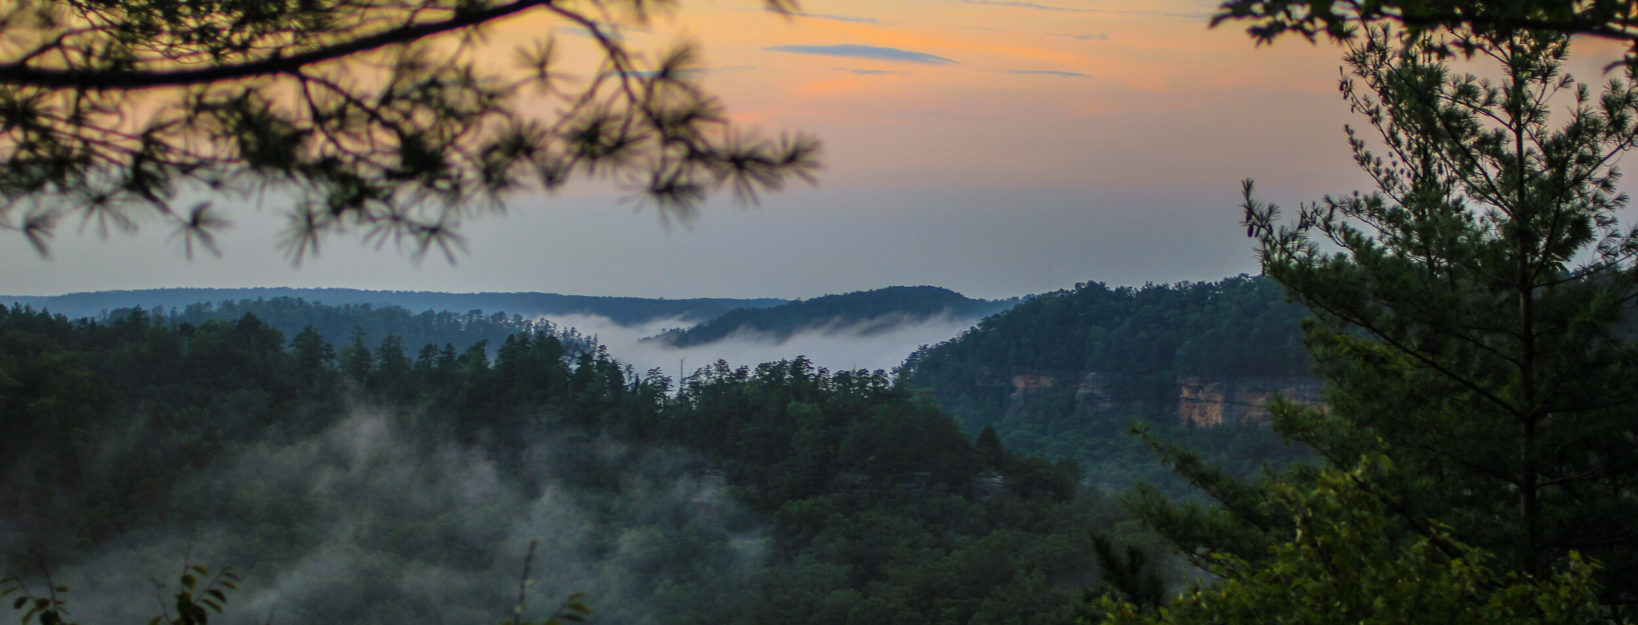 Early sunrise looking across Red River Gorge with fog hanging over valleys